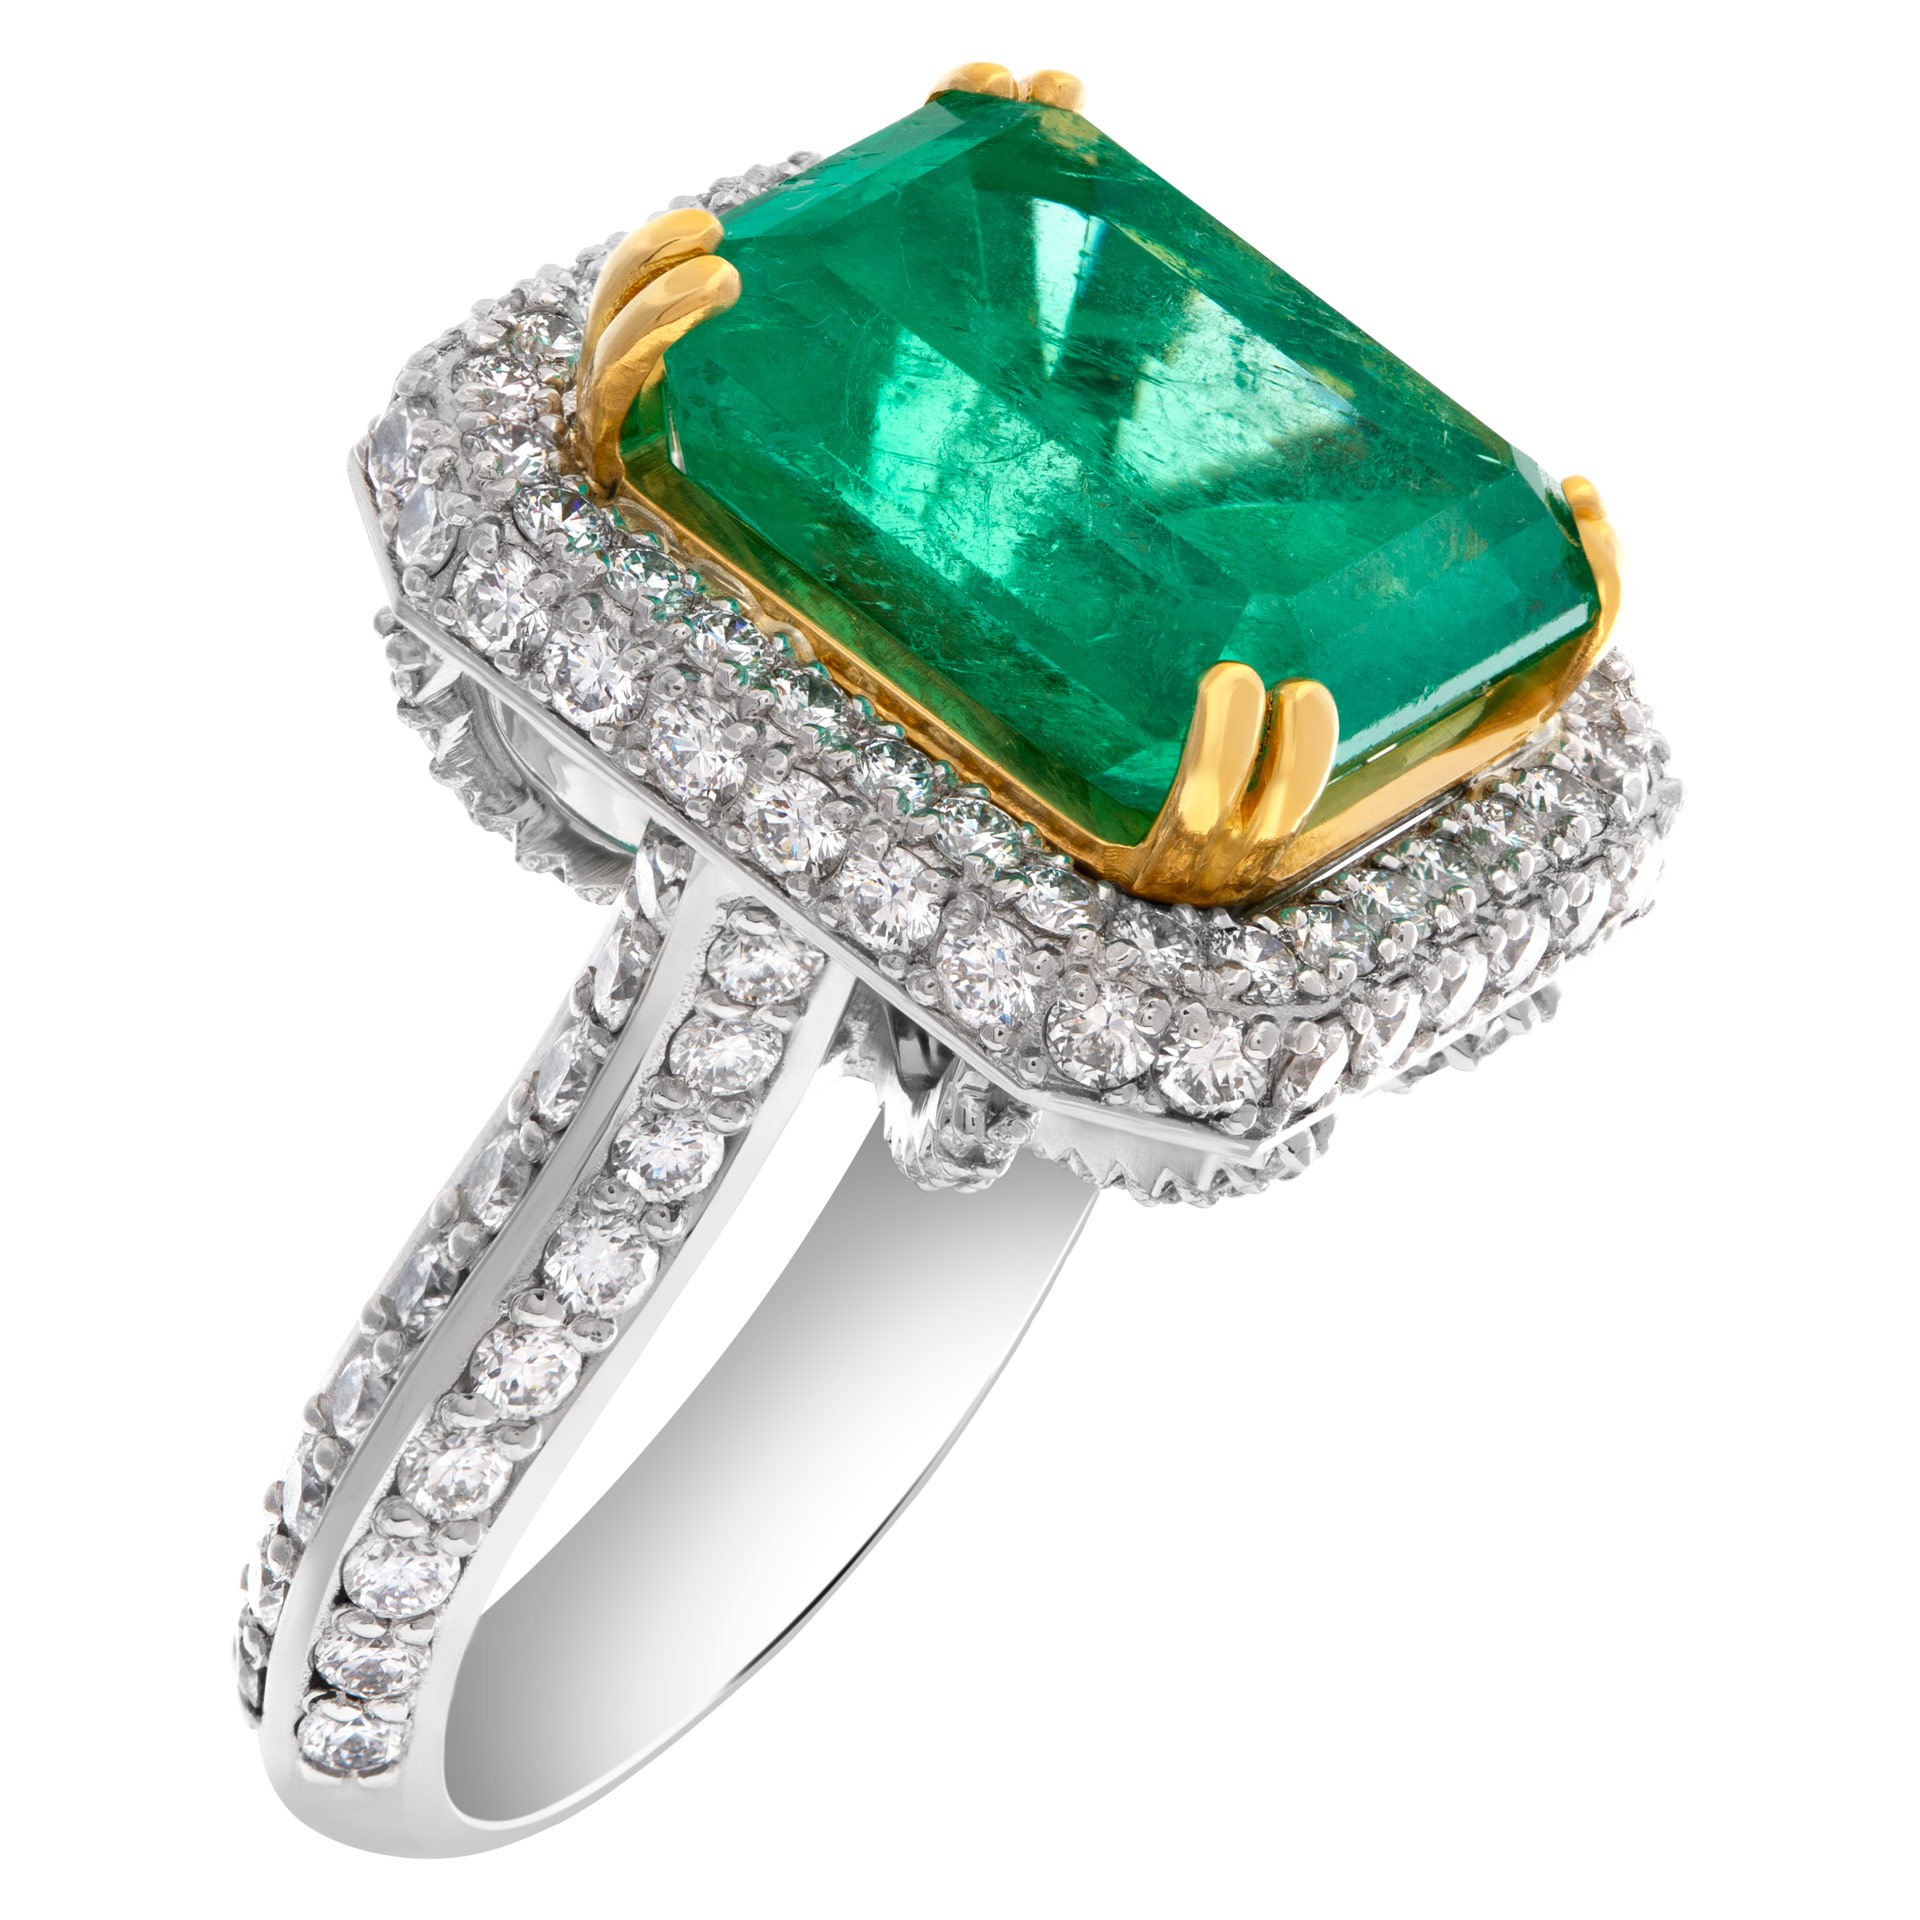 AGL certified 13.01 carat emerald ring in platinum & 18k with 4 carats in pave diamonds image 1